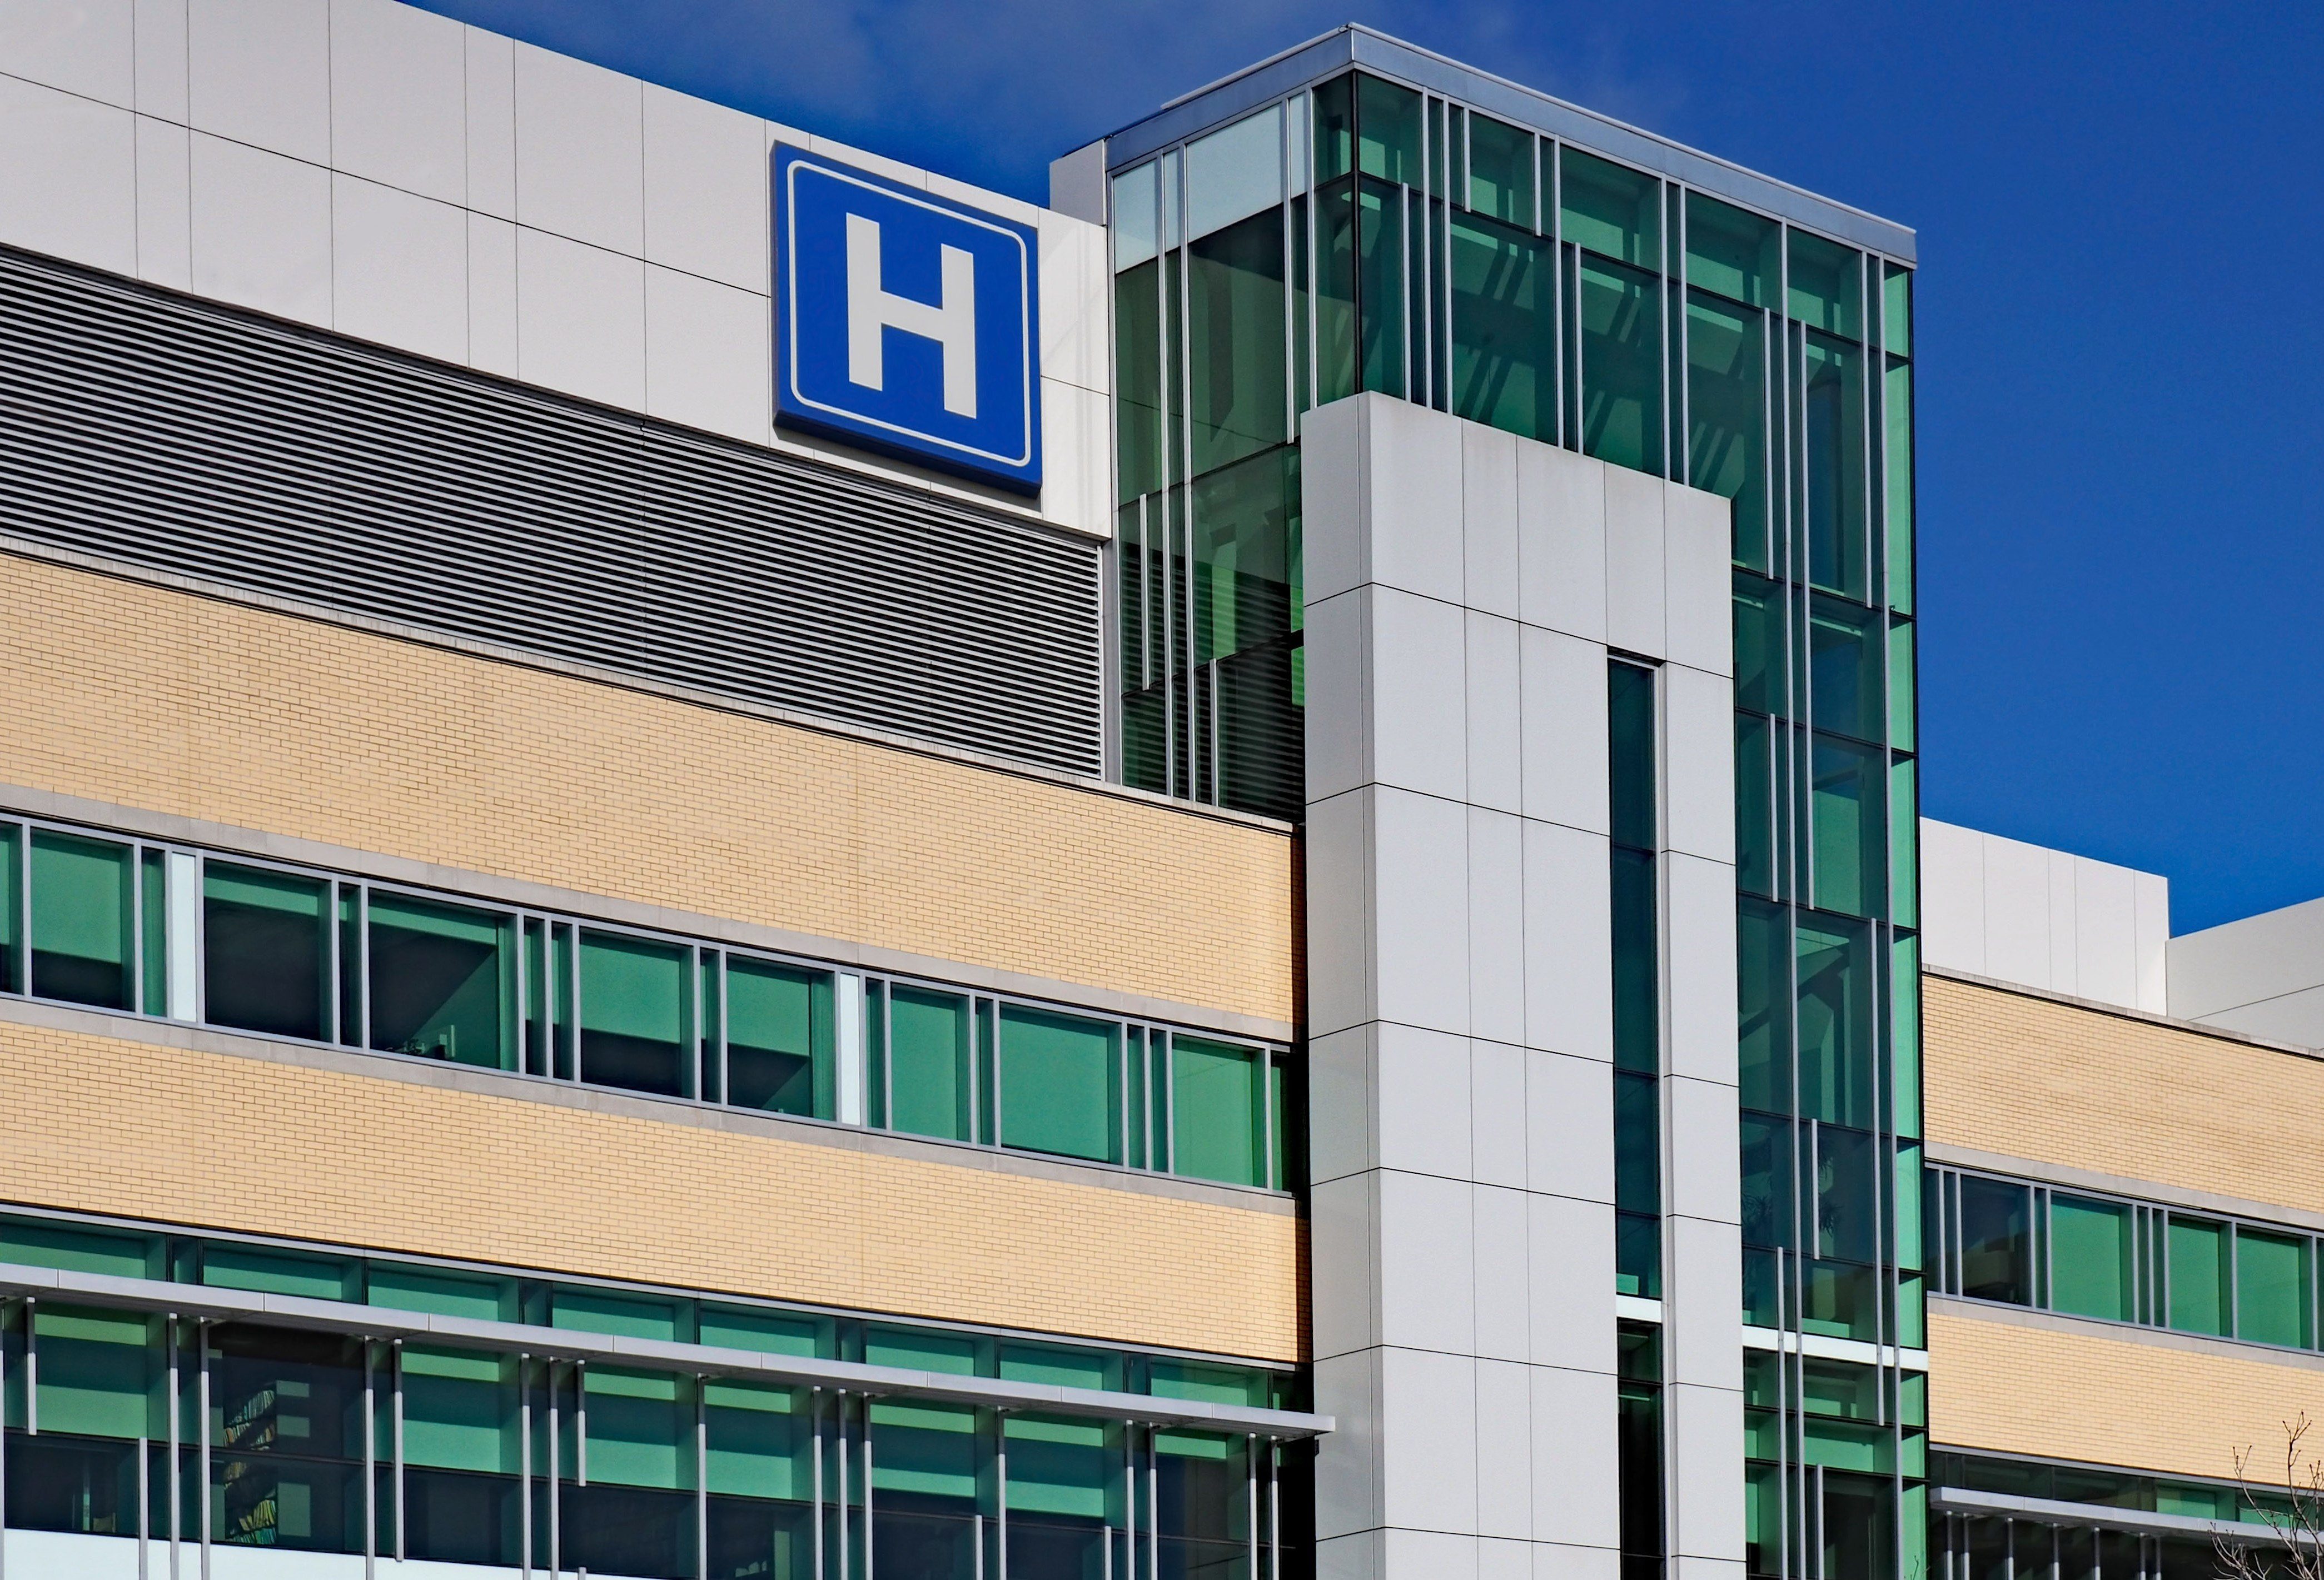 10 of the Best (and 4 of the Worst) Hospitals